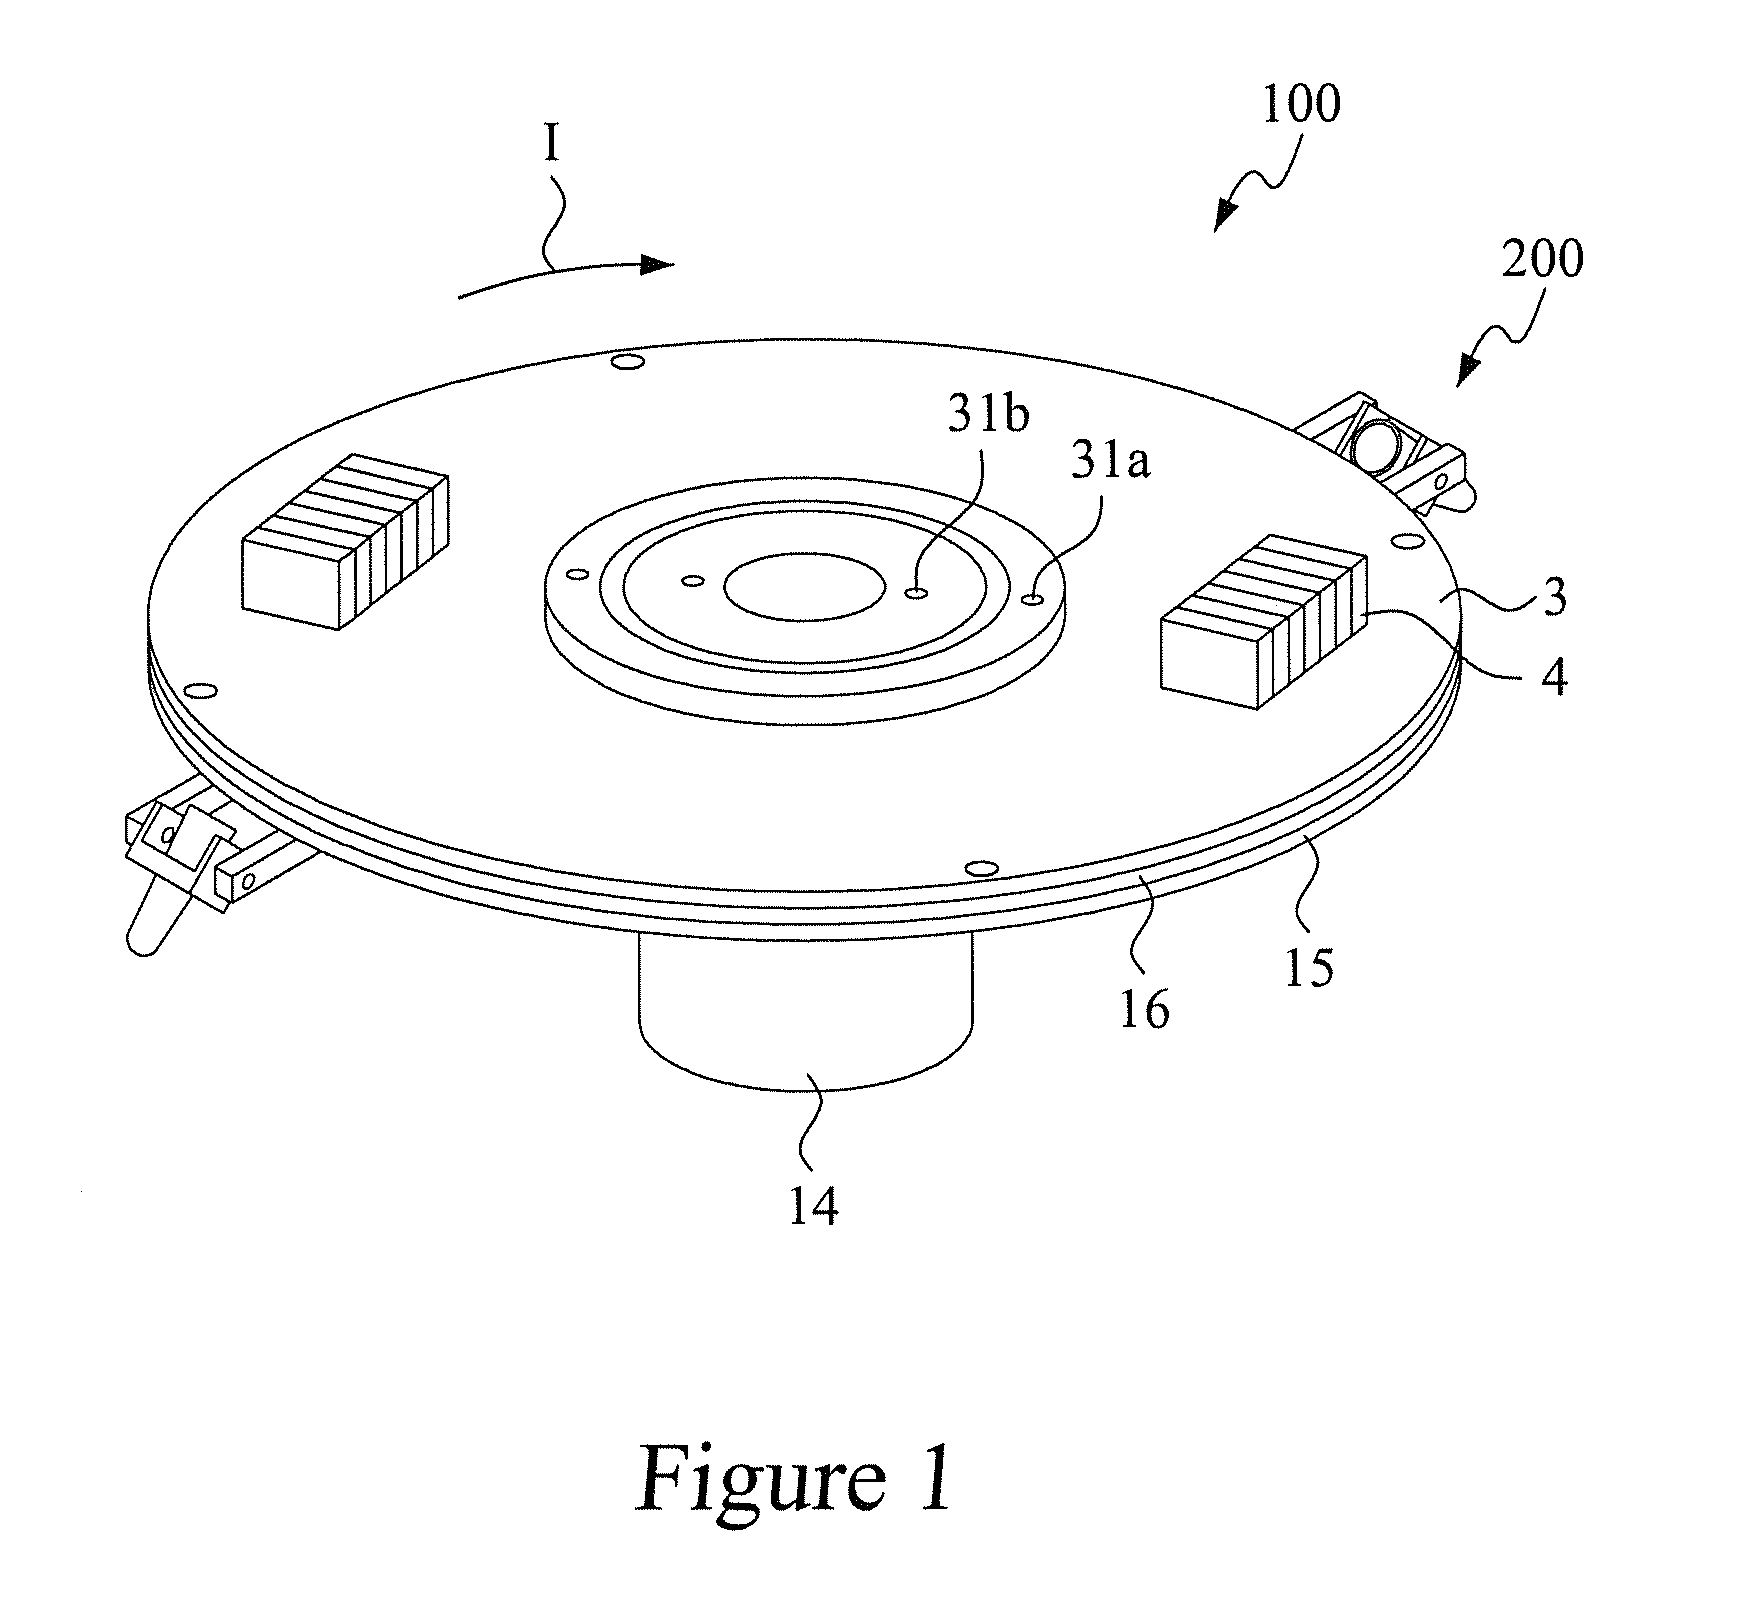 Disk-based fluid sample collection device